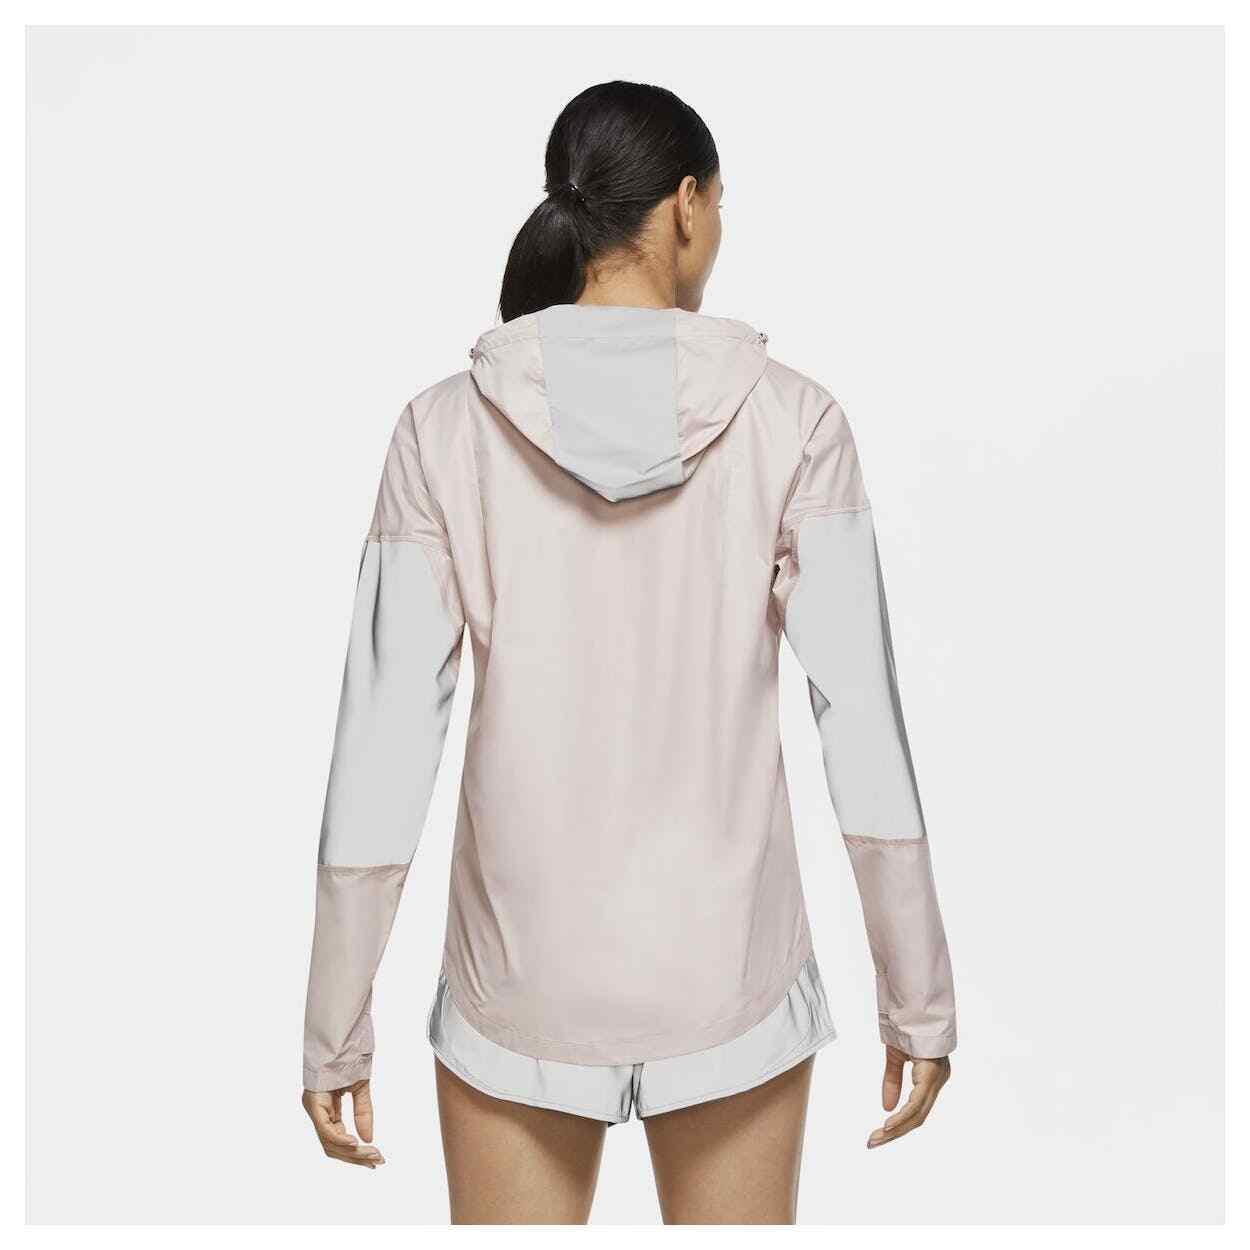 Nike clothing  - rose gold with reflective silver 0